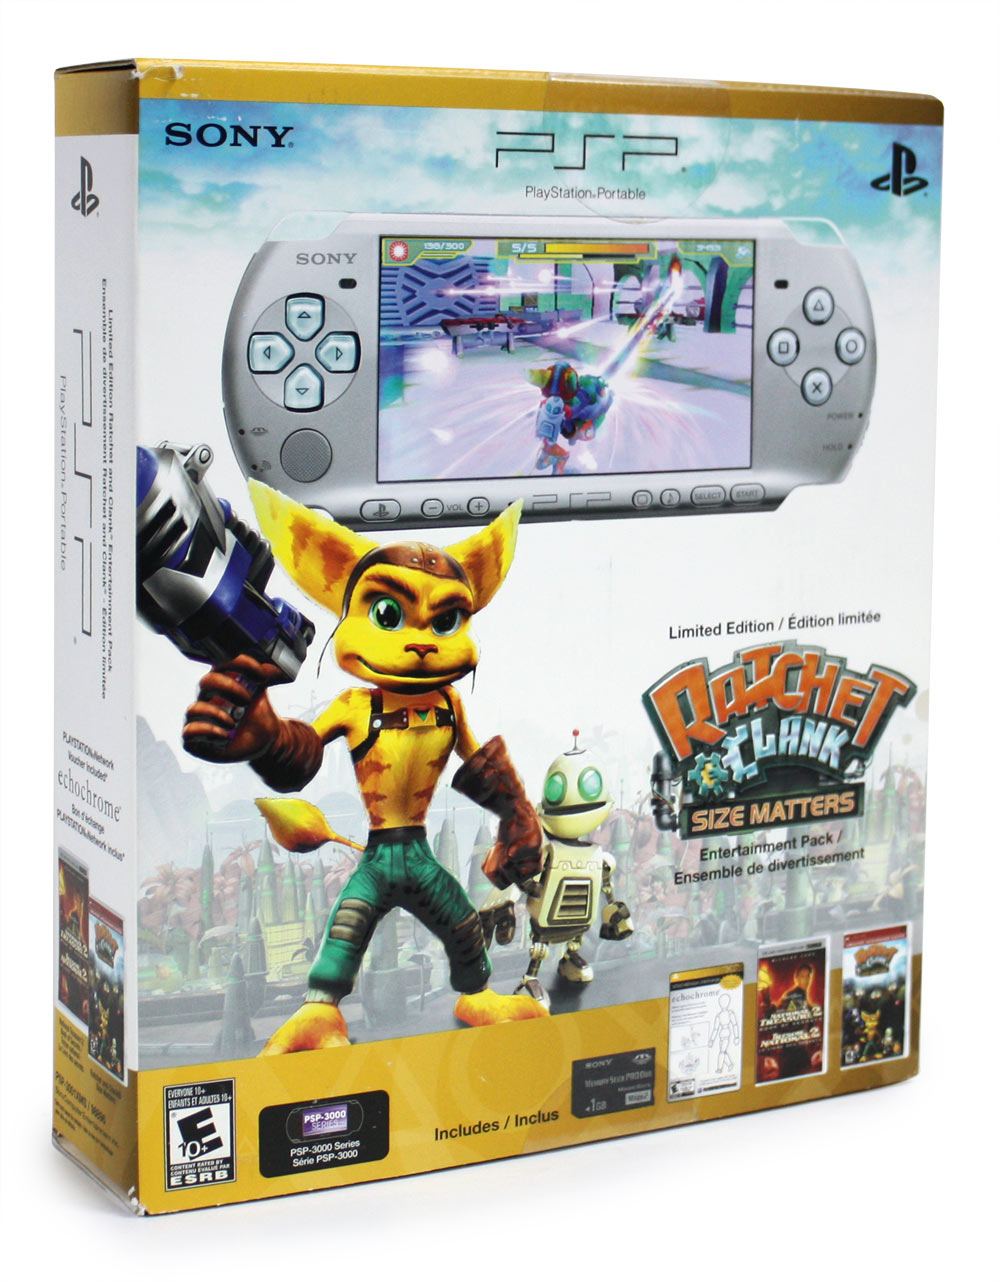 PSP 3000 Limited Edition Ratchet and Clank Entertainment Pack (Silver)